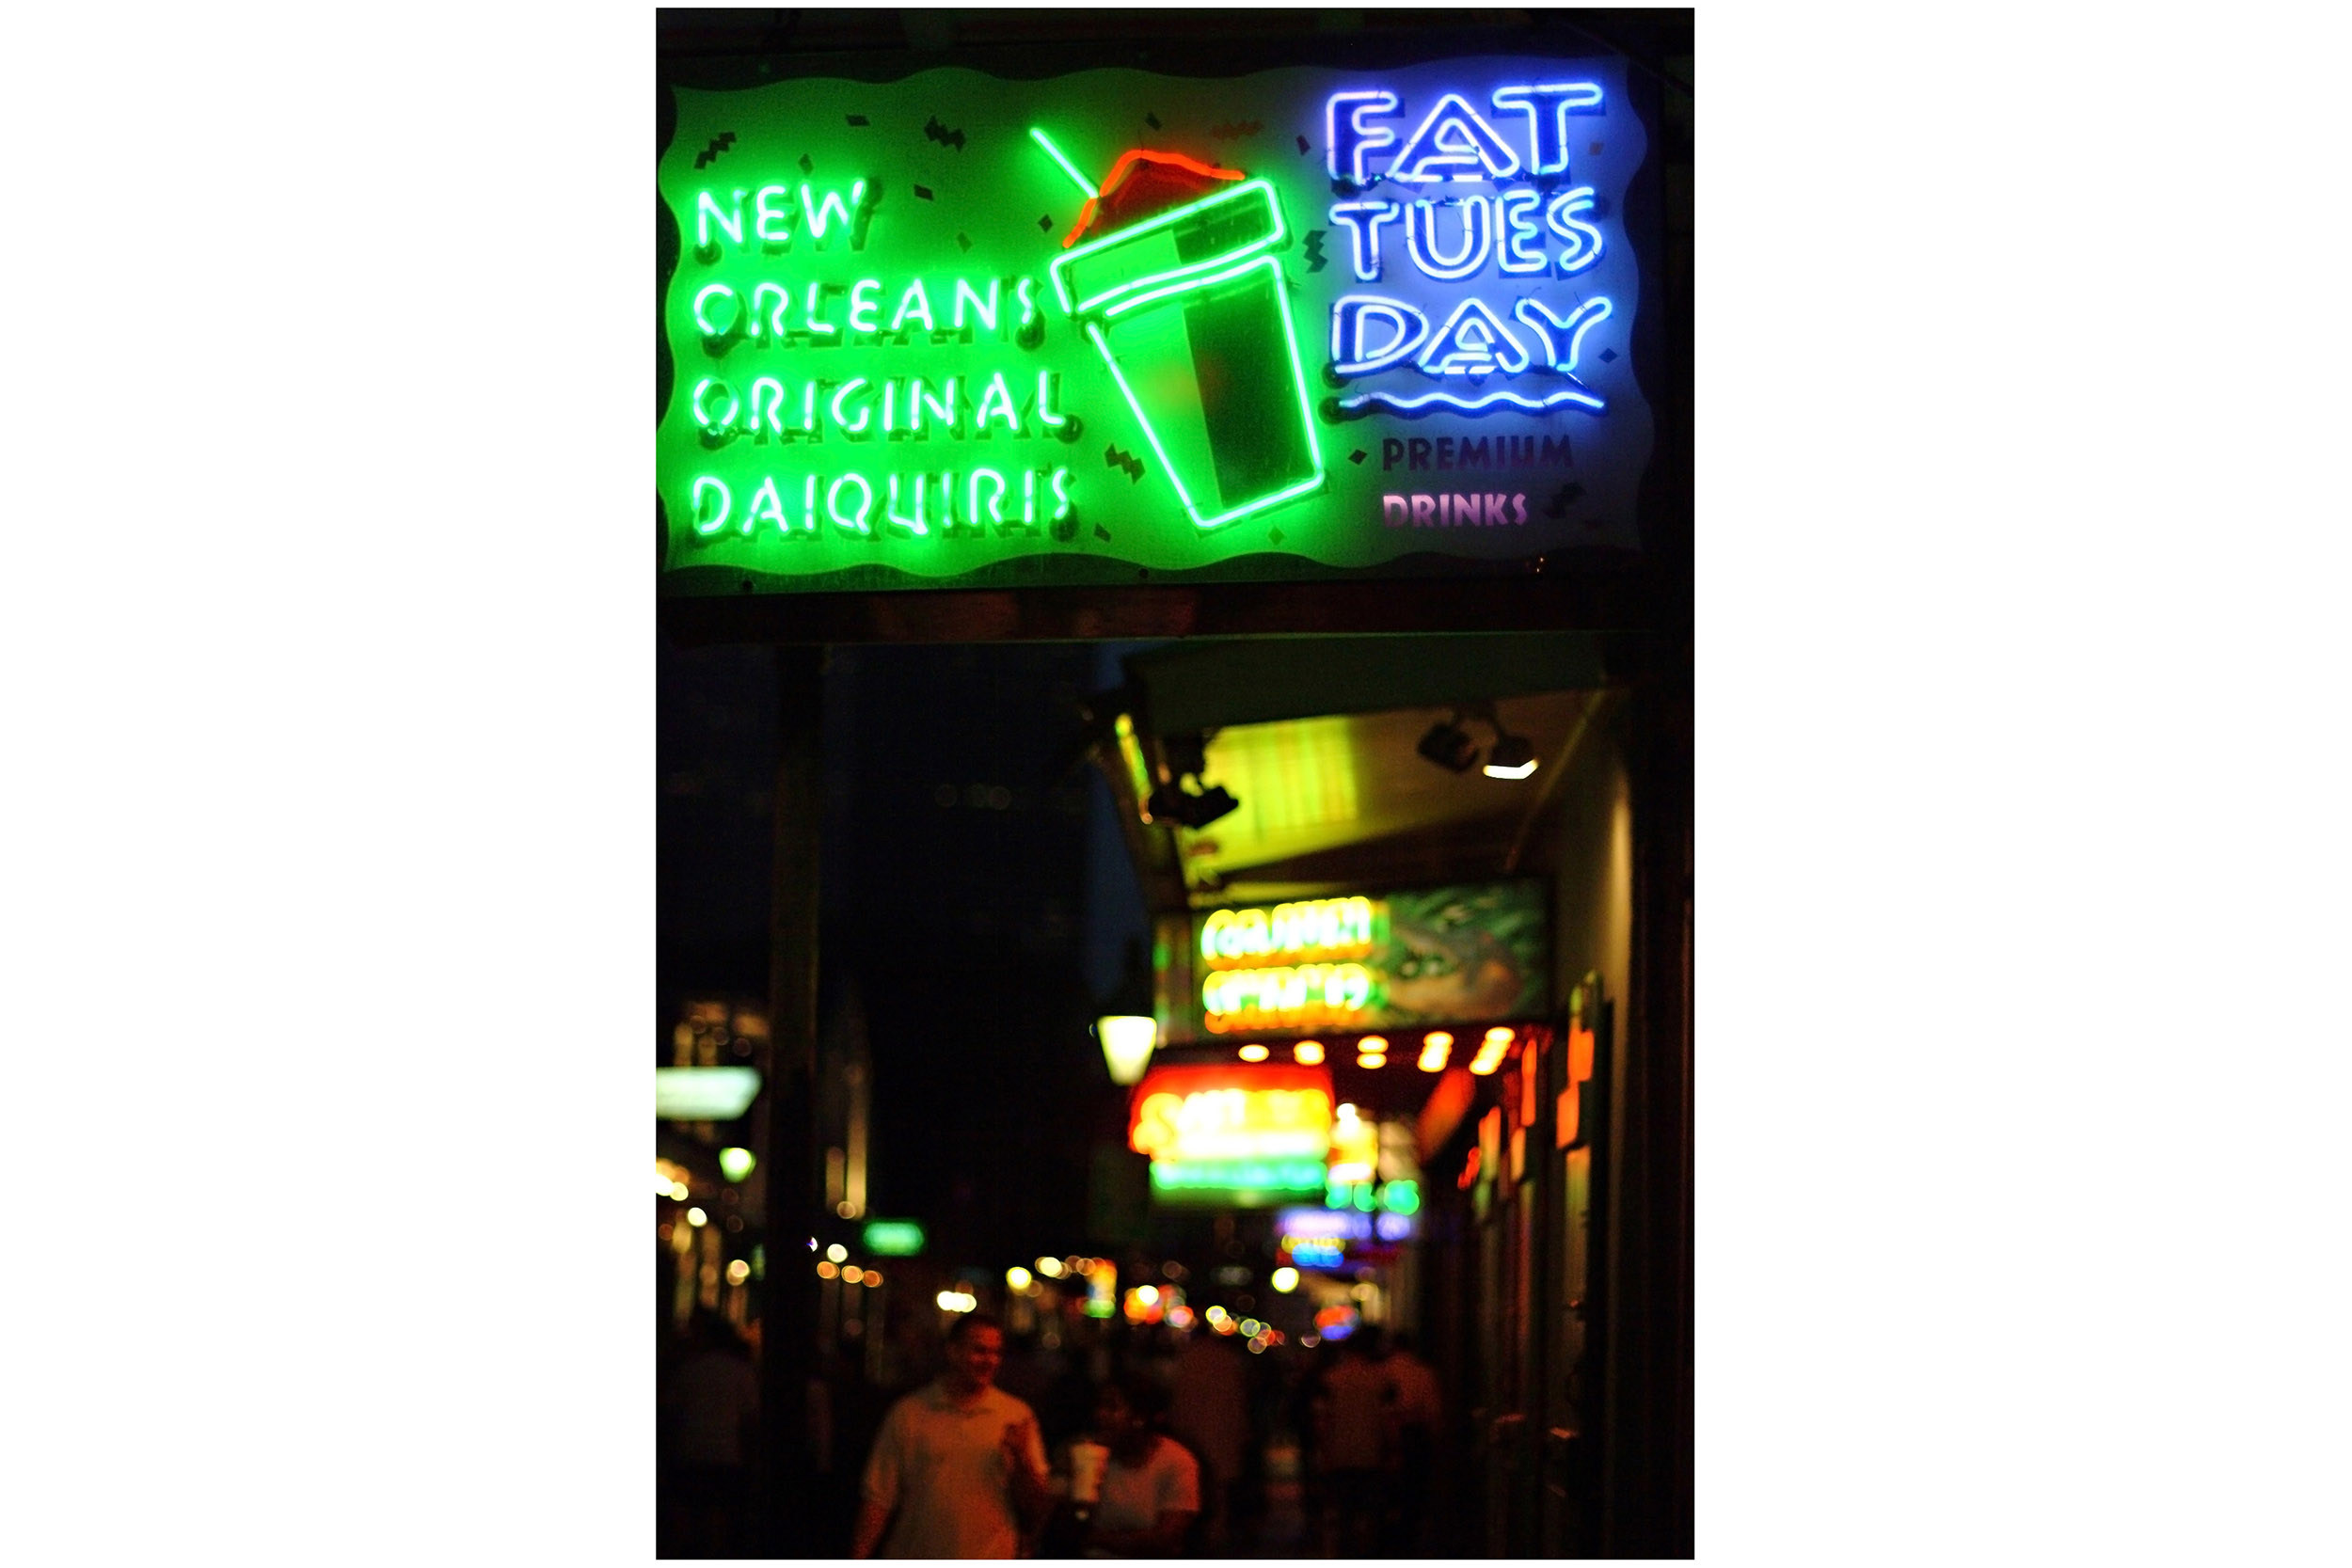 It’s Fat Tuesday somewhere, neon sign